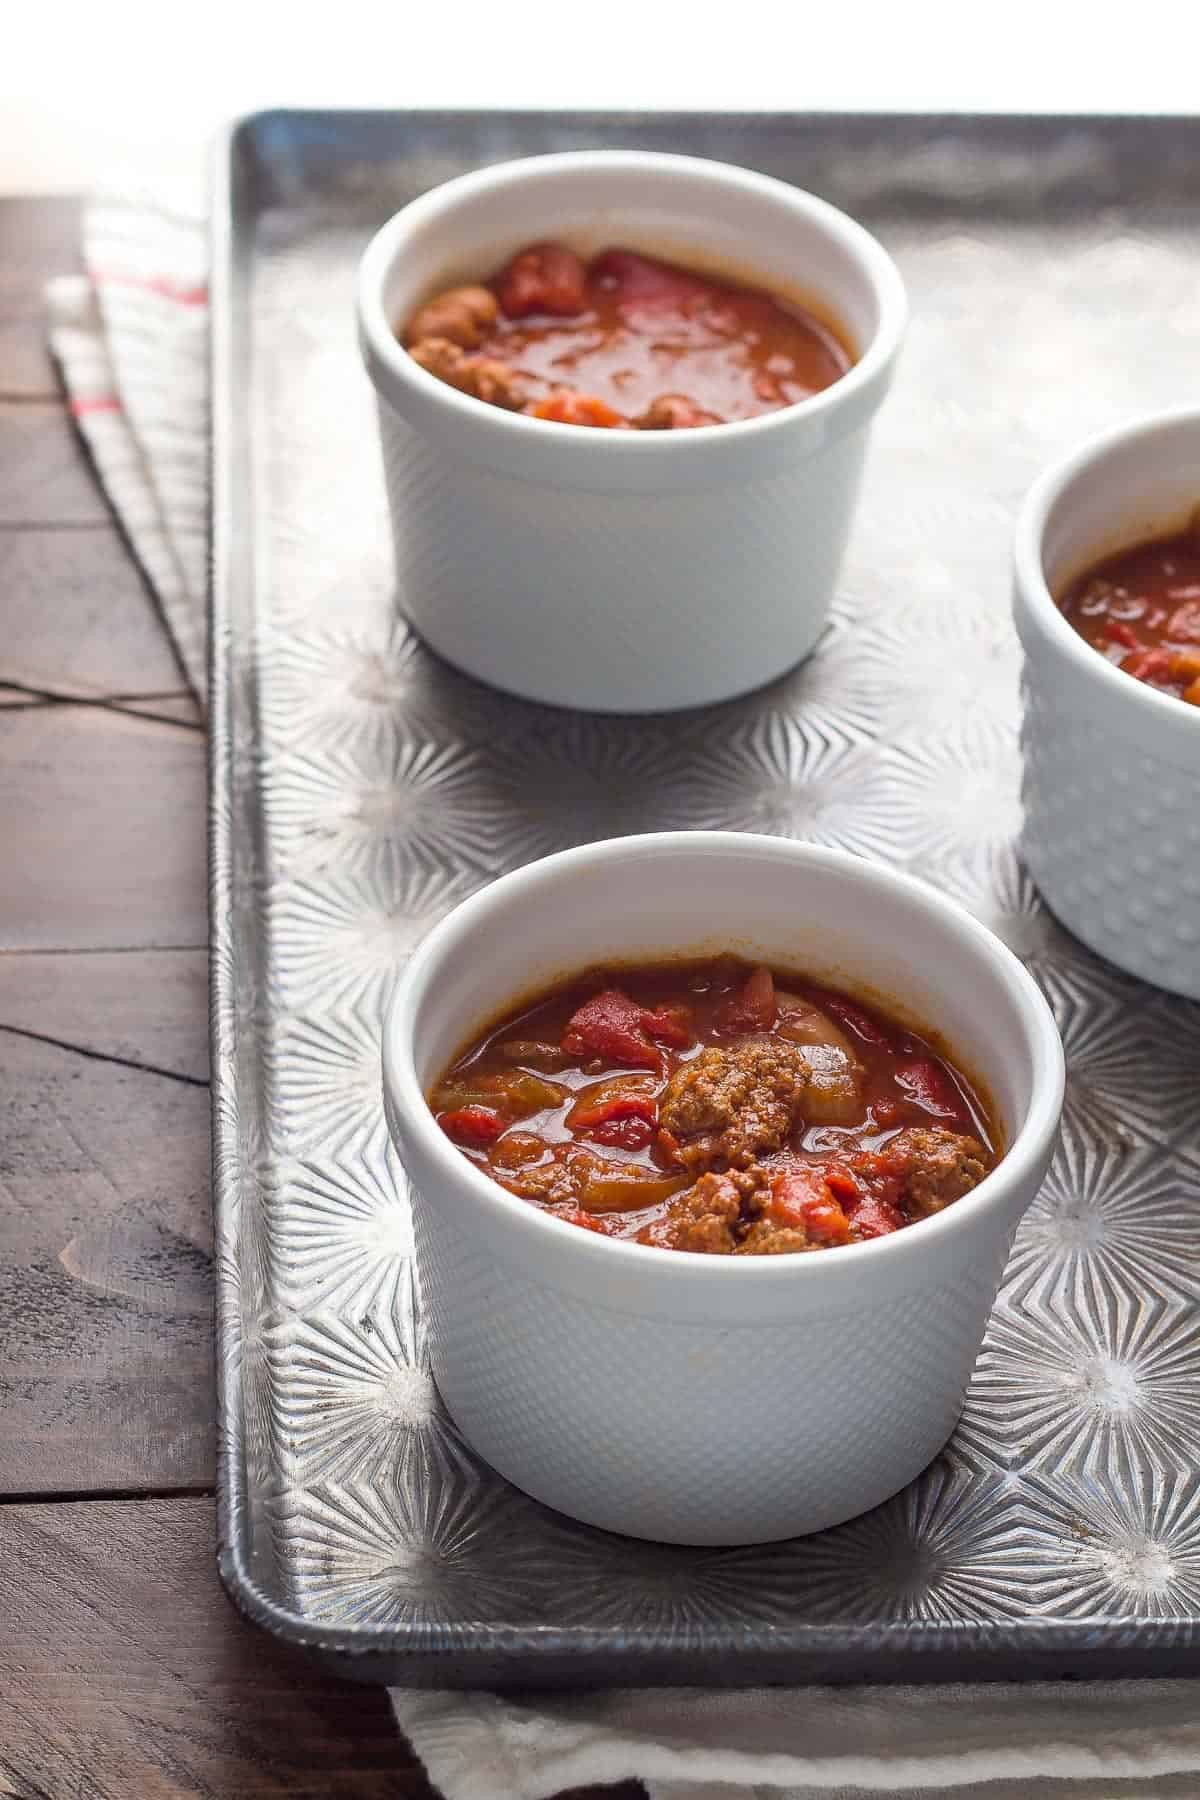 A simple recipe to use up leftover chili! Baked up in a personal-sized portion, and topped with a delicious cornbread topping!